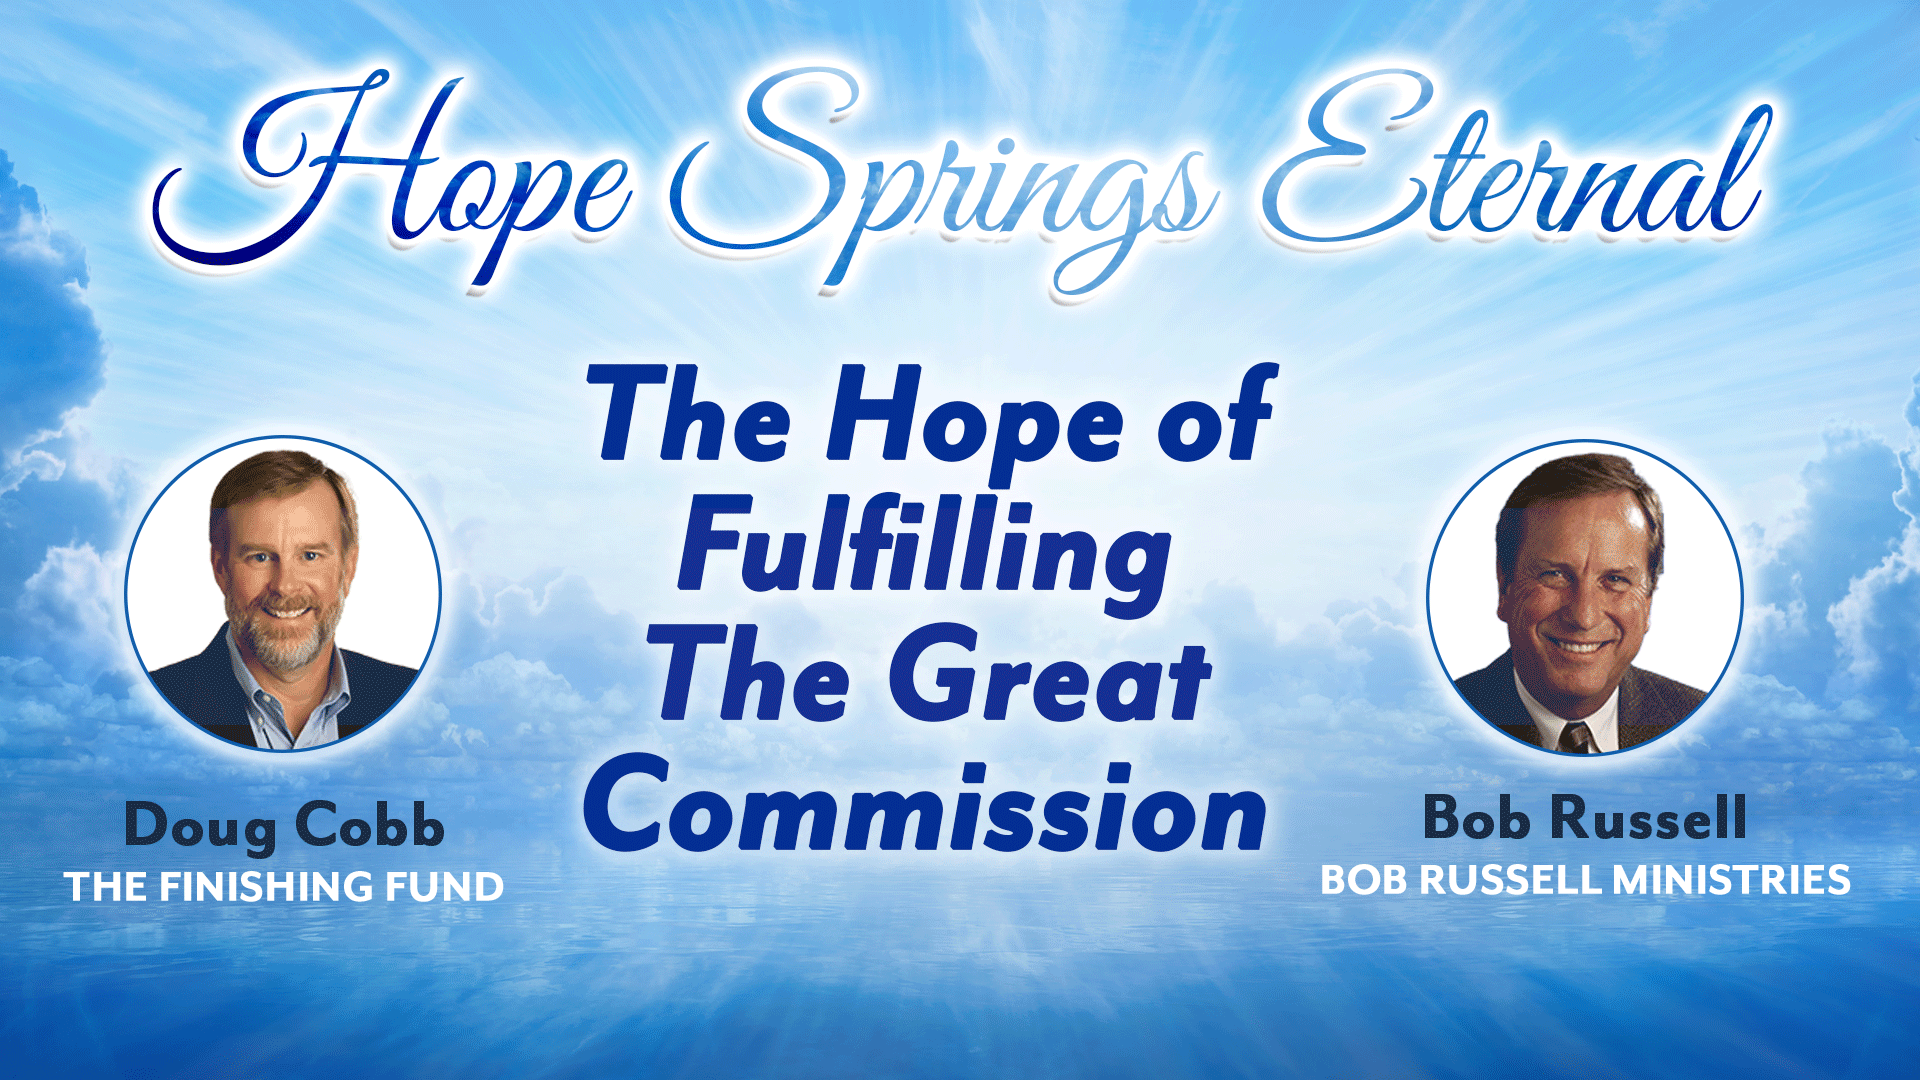 The Hope of Fulfilling the Great Commission